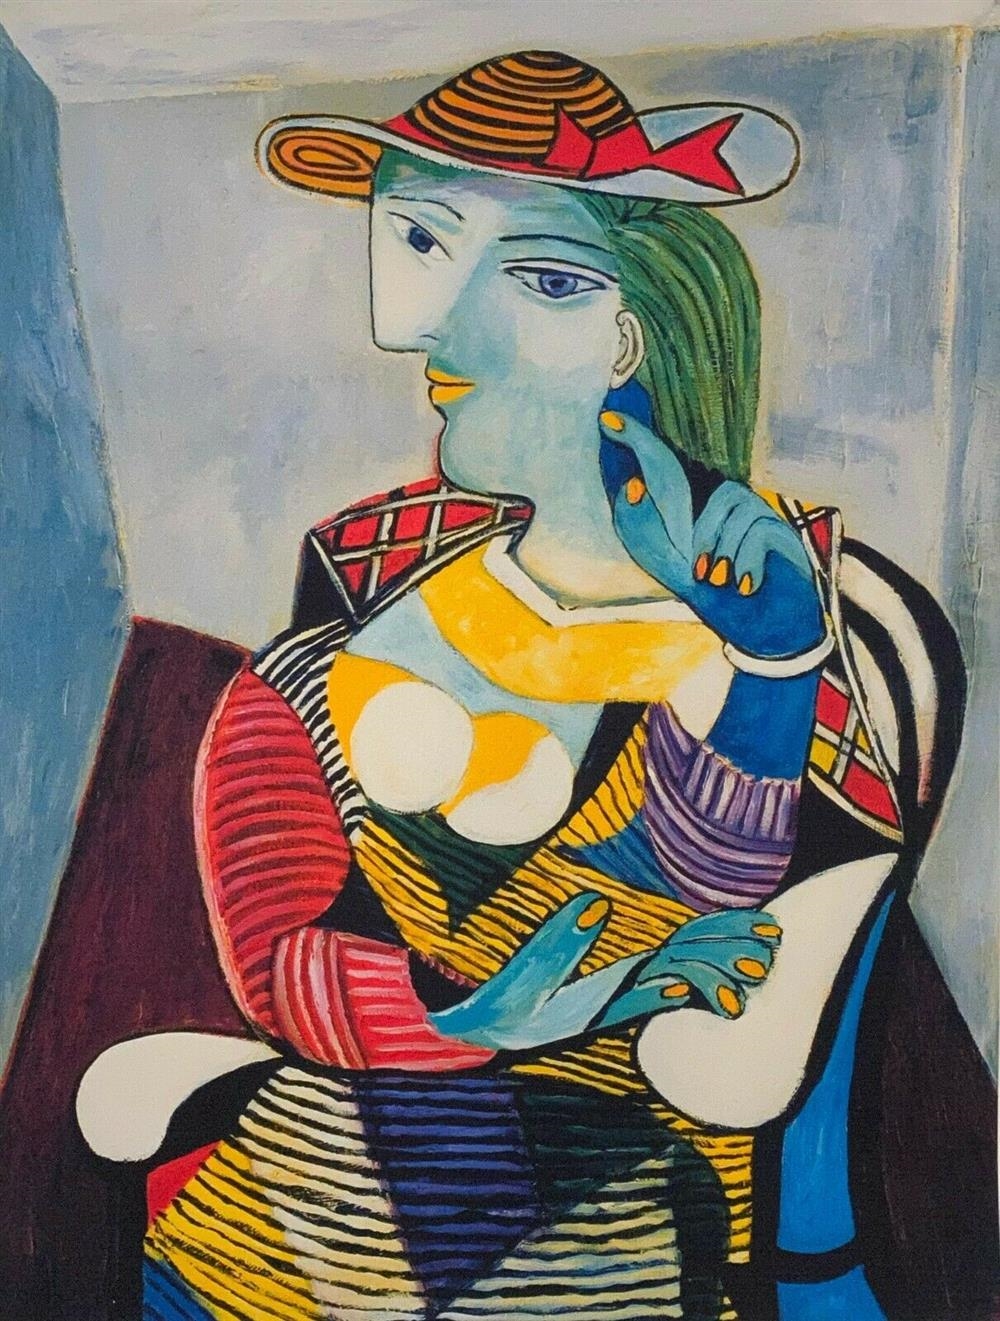 Pablo Picasso | Portrait of Marie Therese Walter | MutualArt